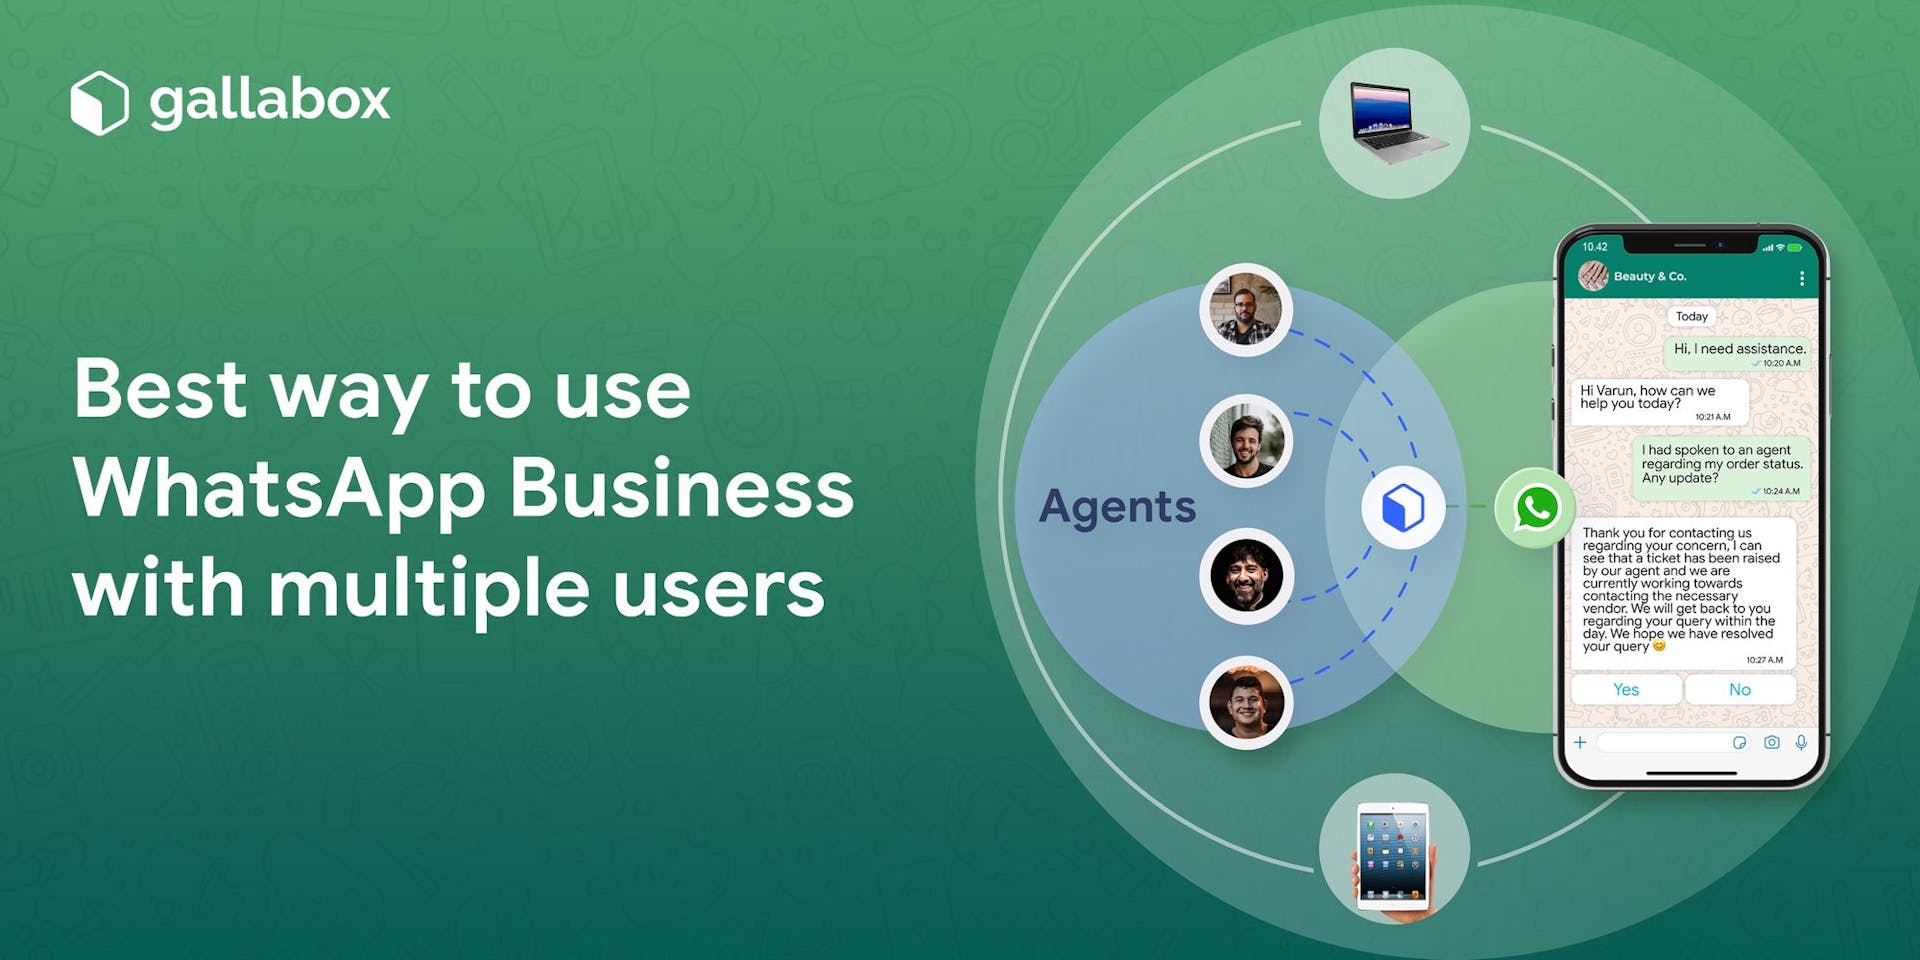 WhatsApp Business with multiple users: A Beginner's Guide